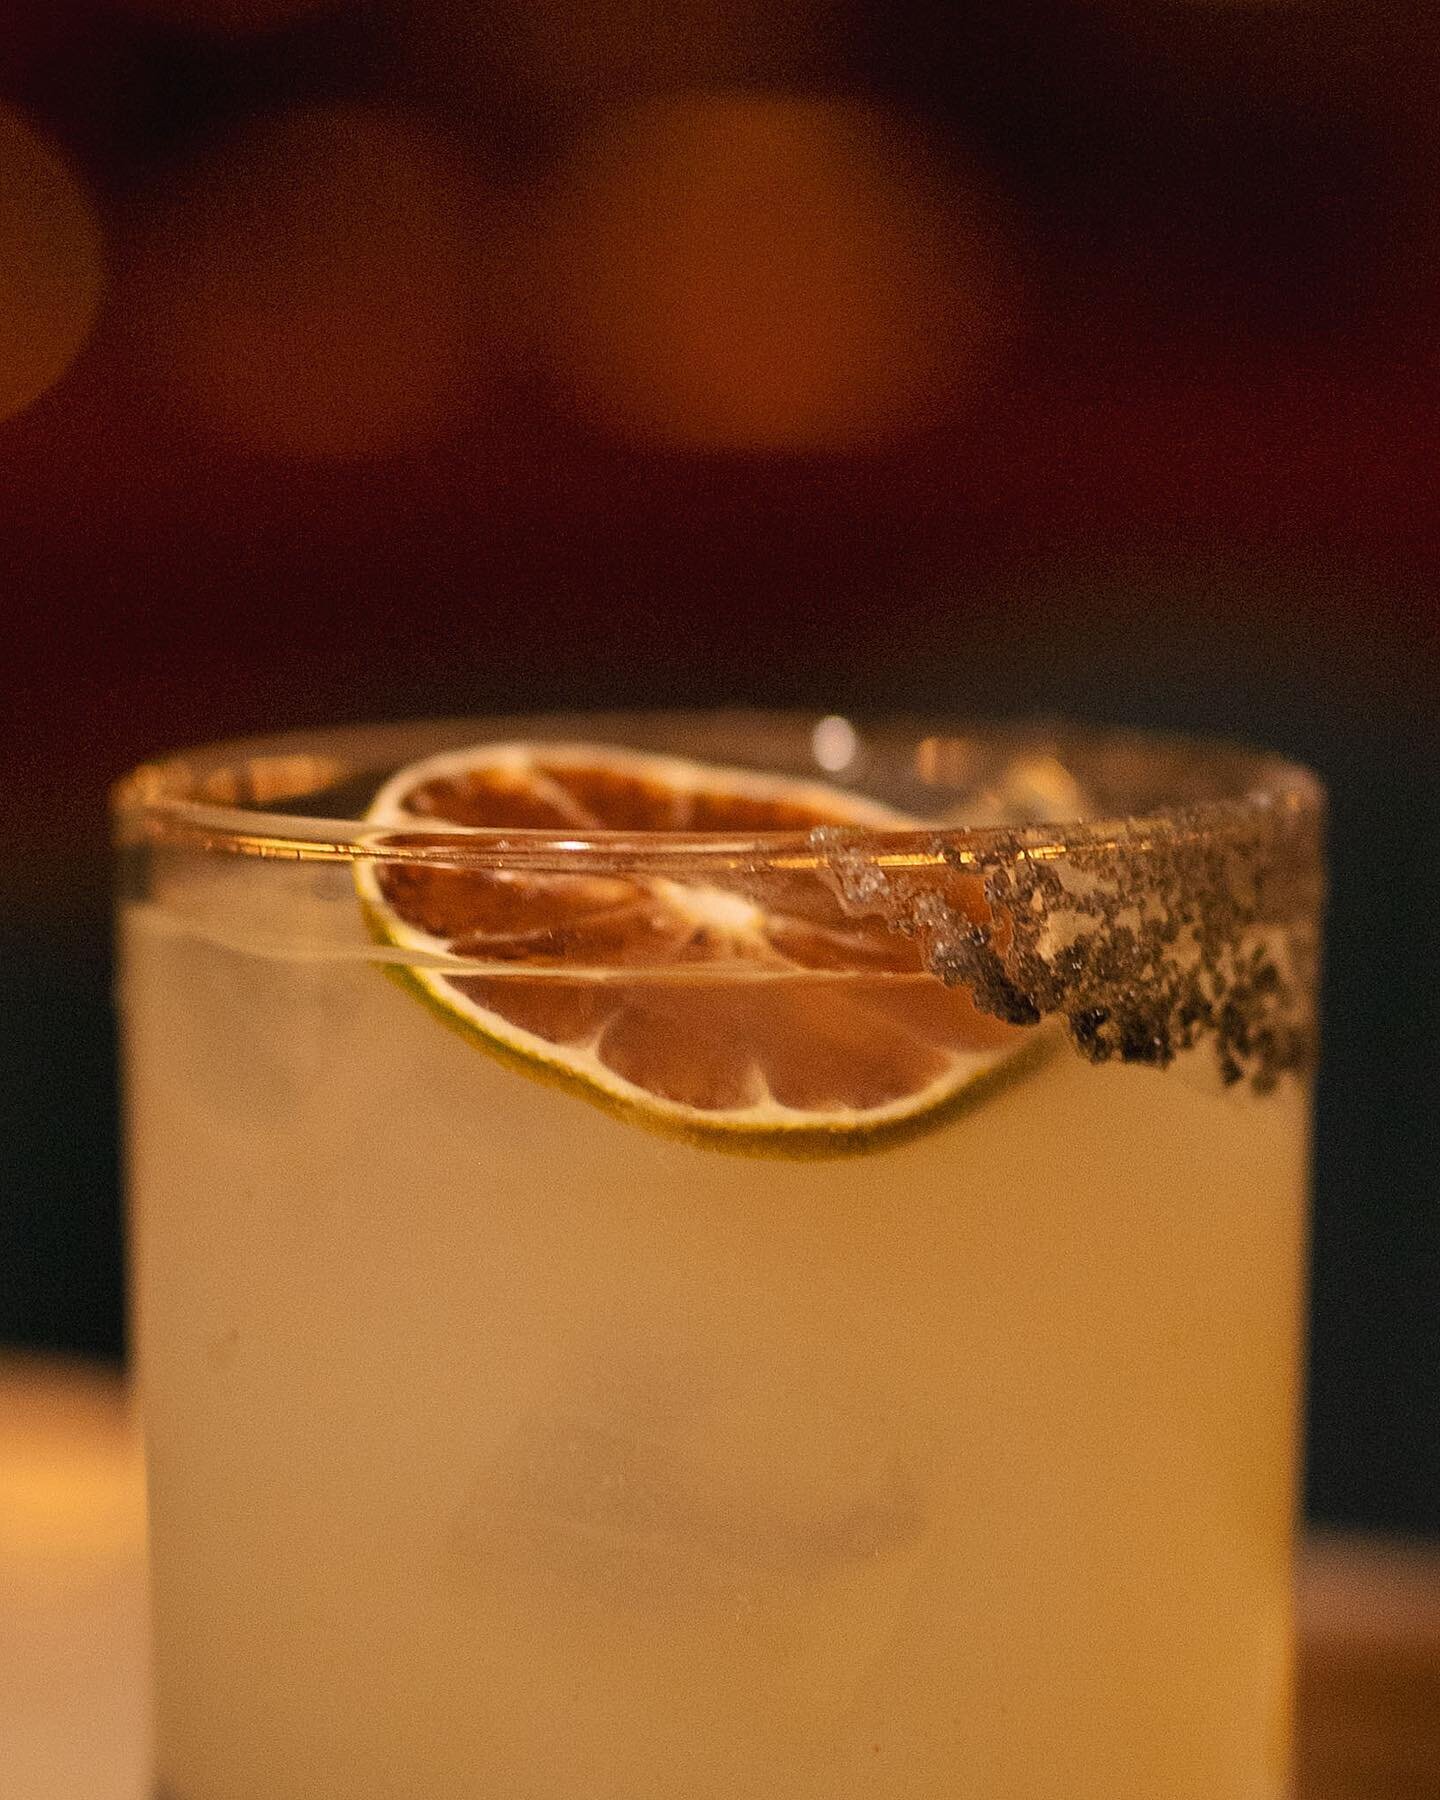 It's all in the details 😉. Made with Don Julio tequila, Leyanda mezcal, cointreau, pineapple cayenne syrup, lime, &amp; orange juniper bitters, it's a Reyna classic for a reason. 🥃

#REYNAnyc
#NYCeats
#nycrestaurants